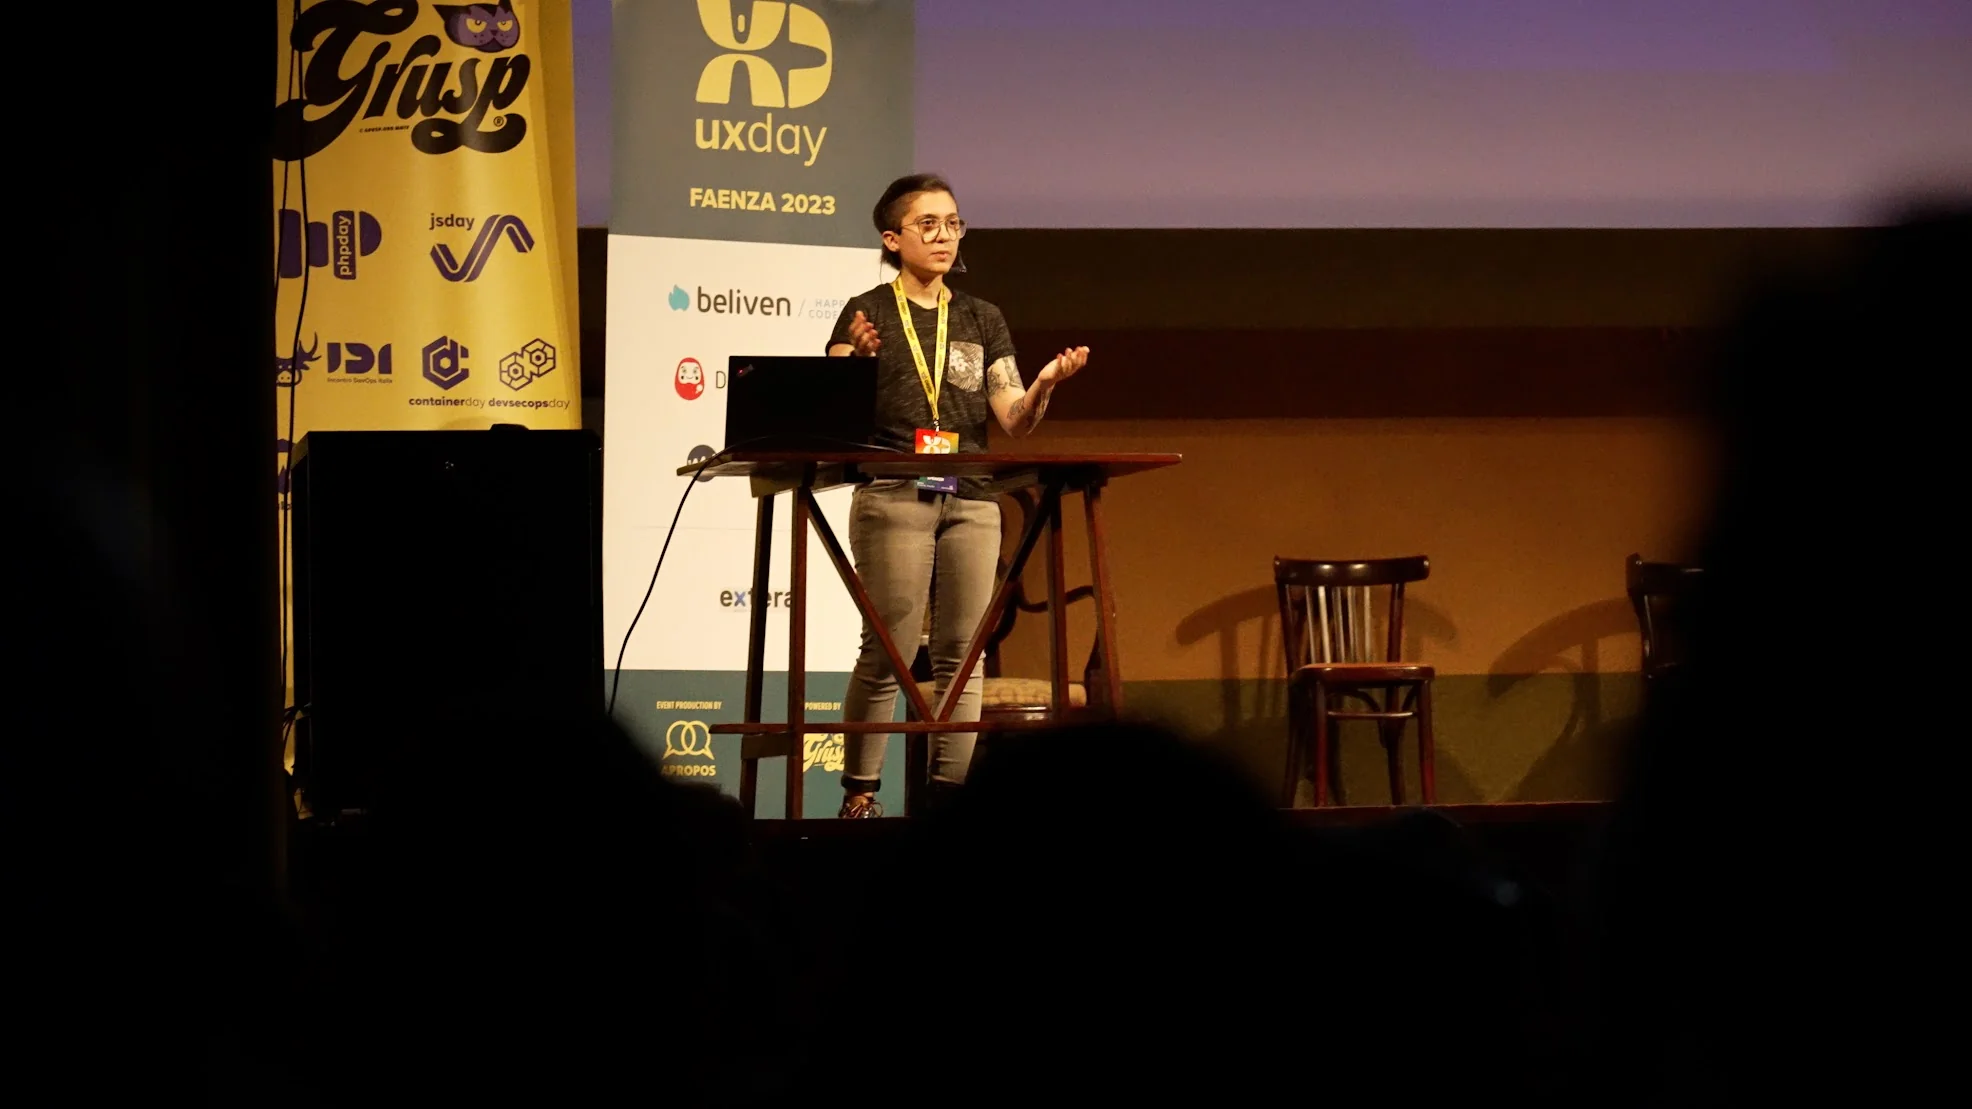 Valeria Salis speaking at UX Day 2023 in Faenza, Italy. Valeria has short hair and is wearing a black t-shirt and the coloured badge from GrUSP.